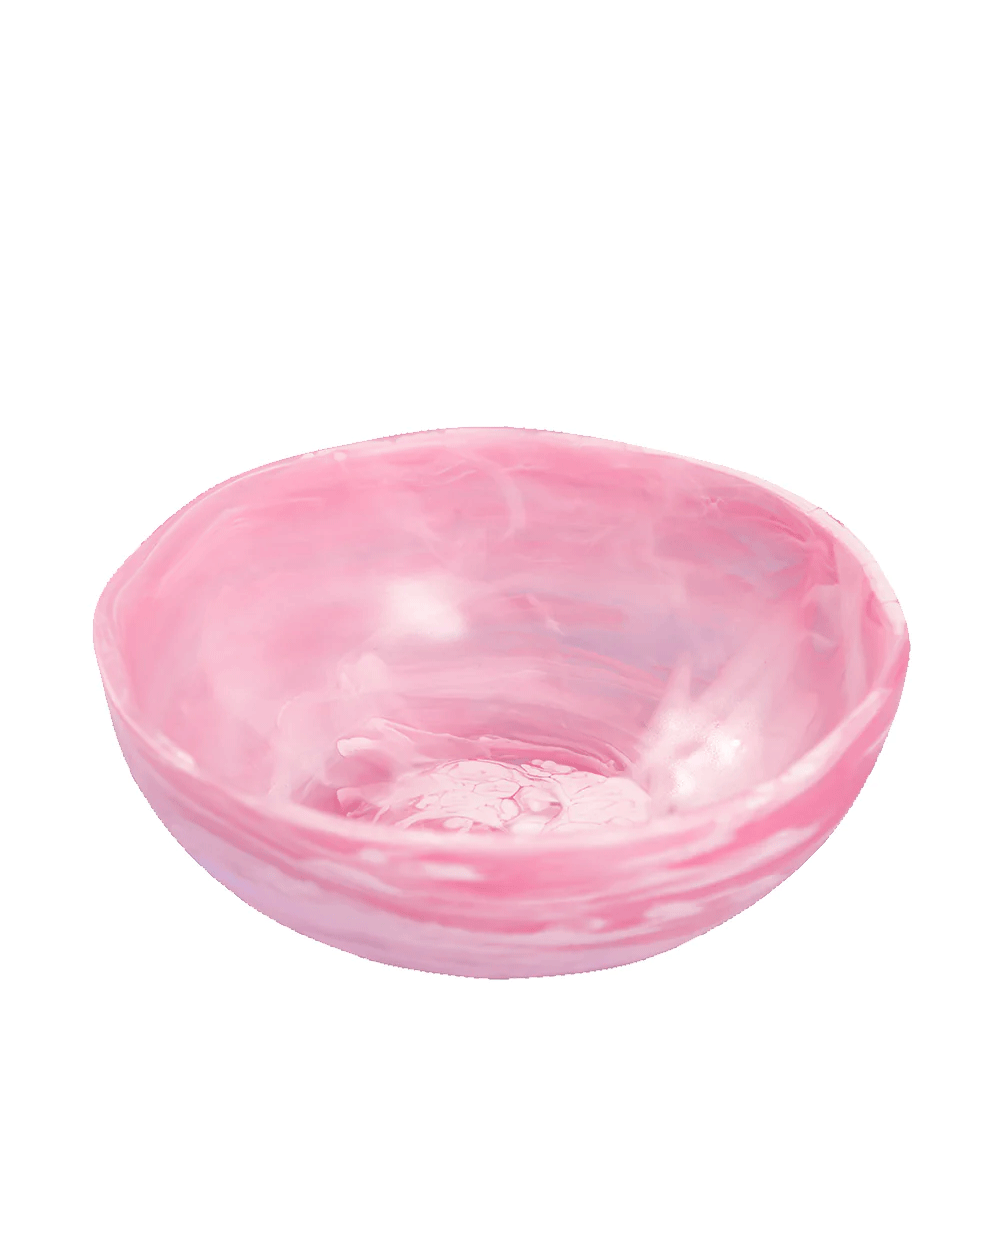 Large Wave Bowl in Pink Swirl